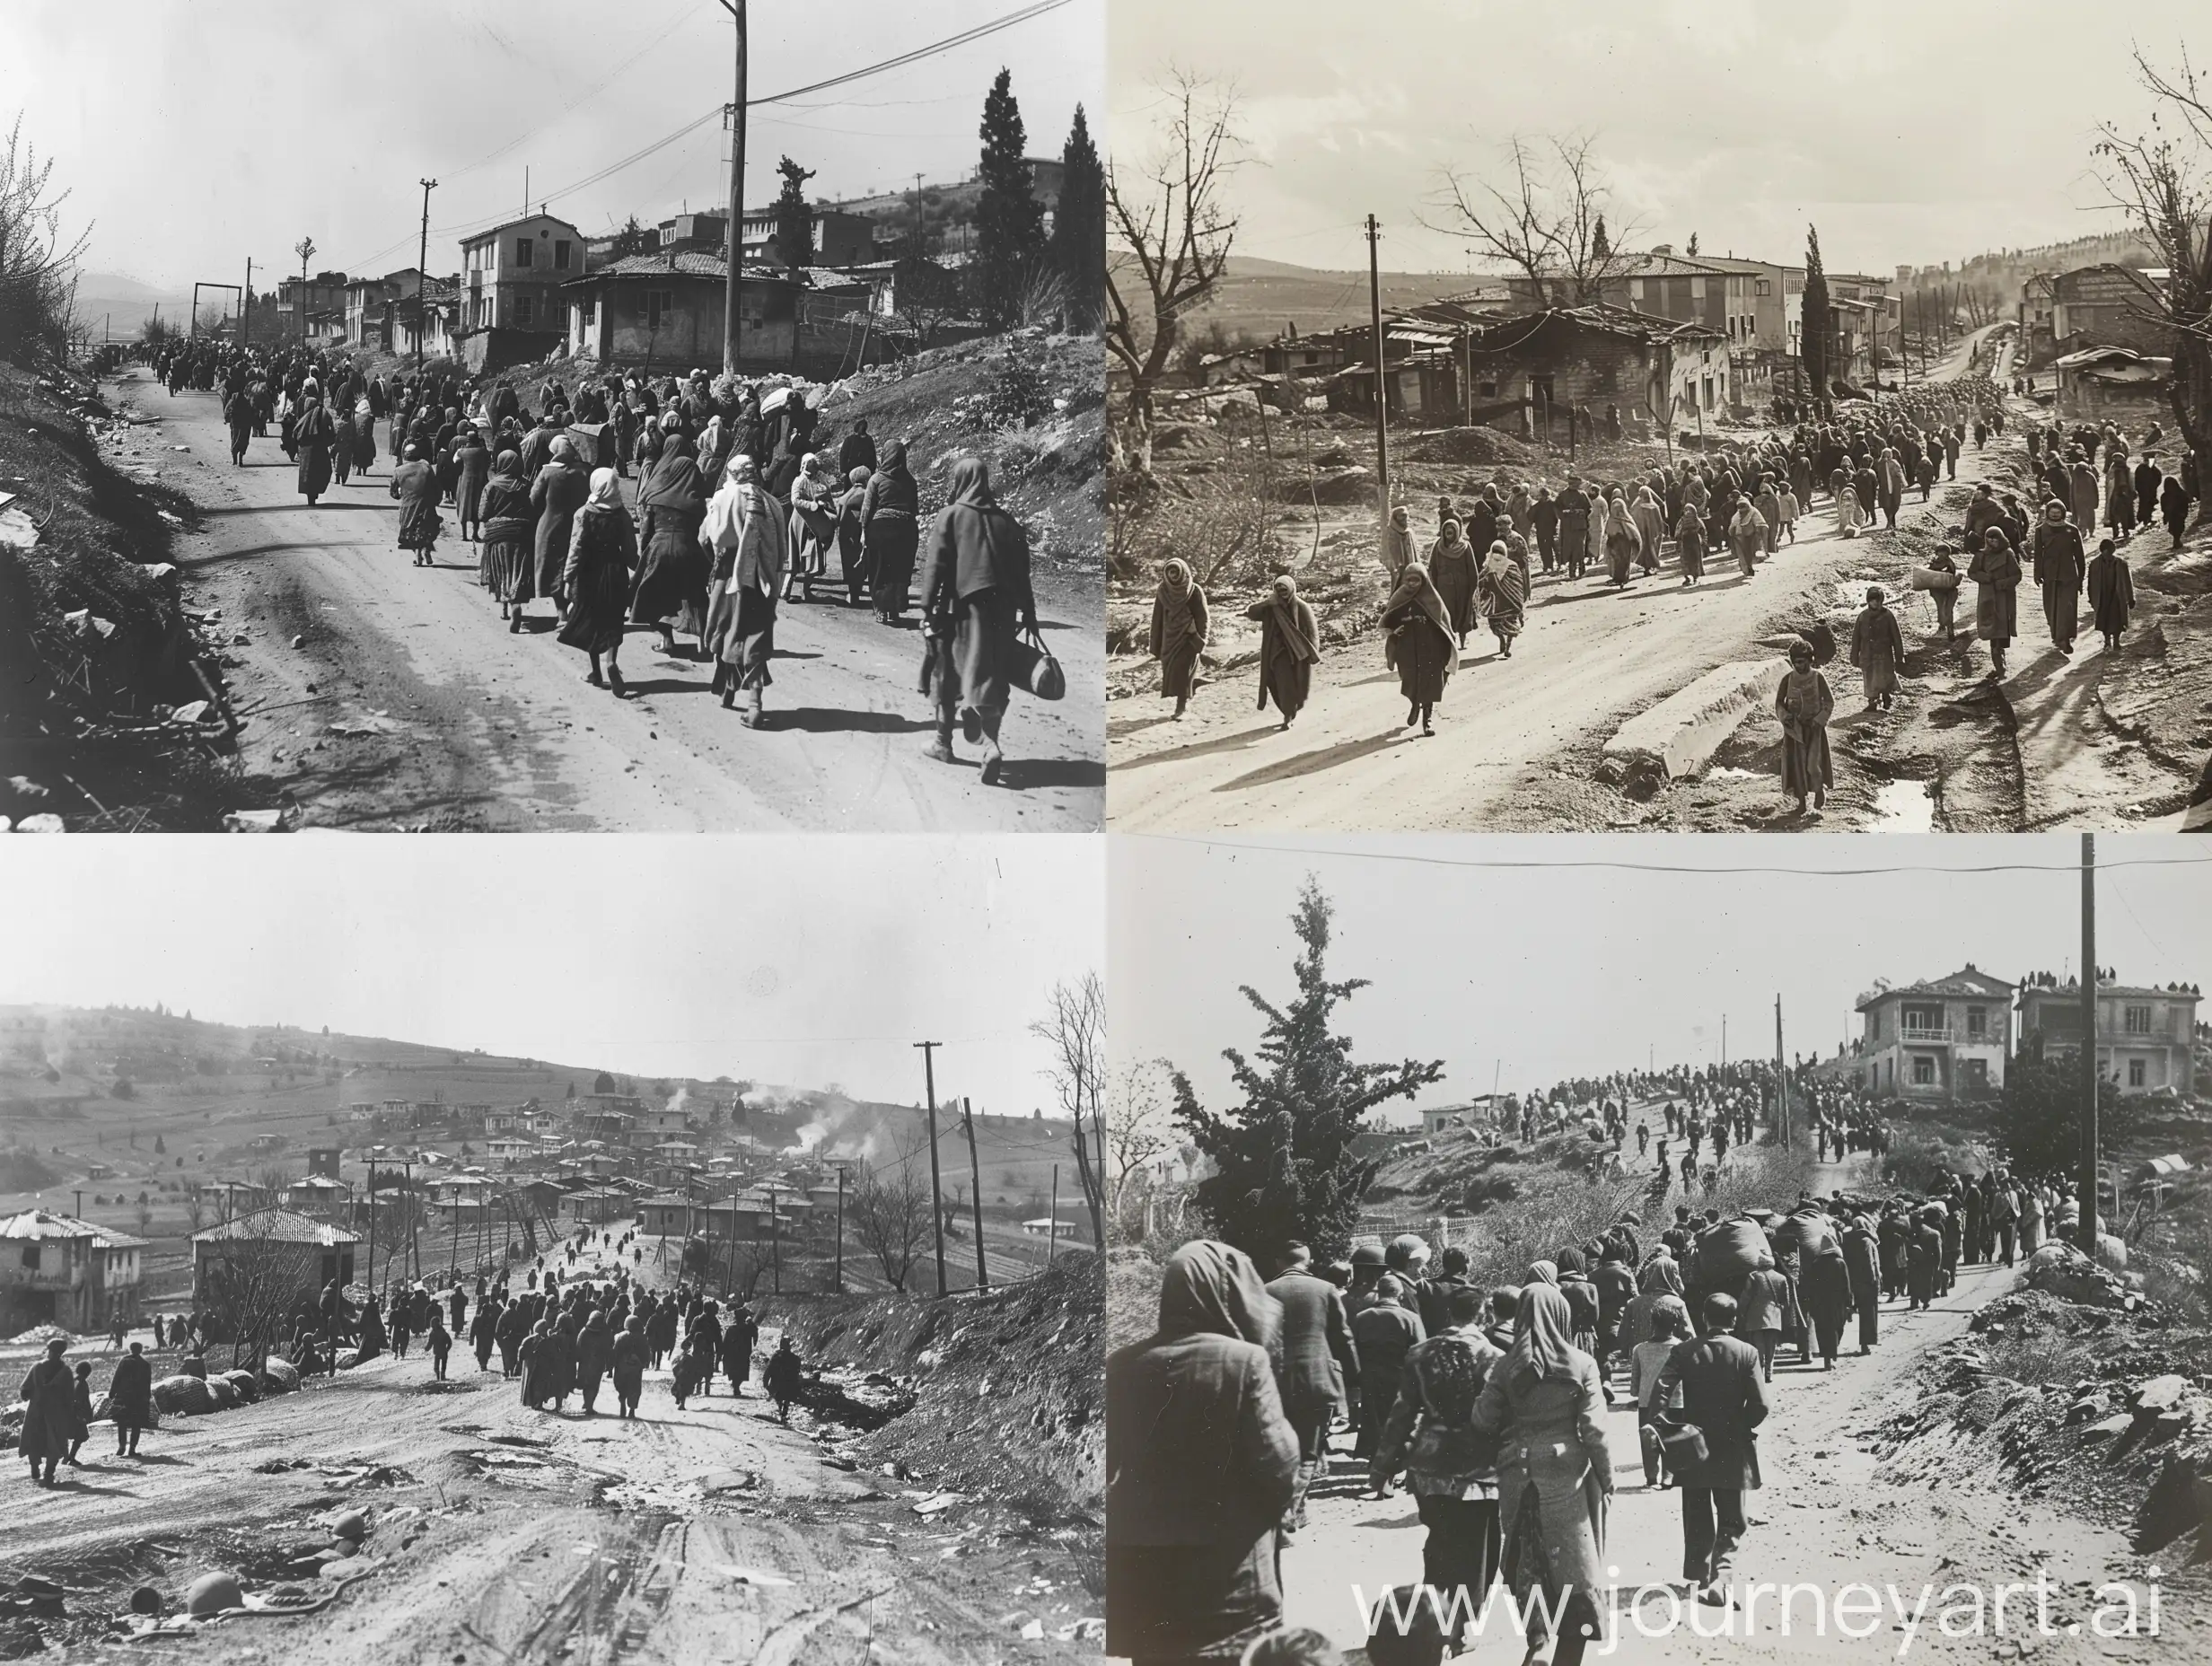 On April 16, about a thousand inhabitants of Orhangazi were deported to Gemlik by the Greek army. While the town was partially burned by the Greeks, the refugees reached Gemlik under difficult conditions. In the shadow of robbery and violence, many lost their lives on the way. With the intervention of the Allied commission, these people were eventually evacuated by ship to Istanbul.